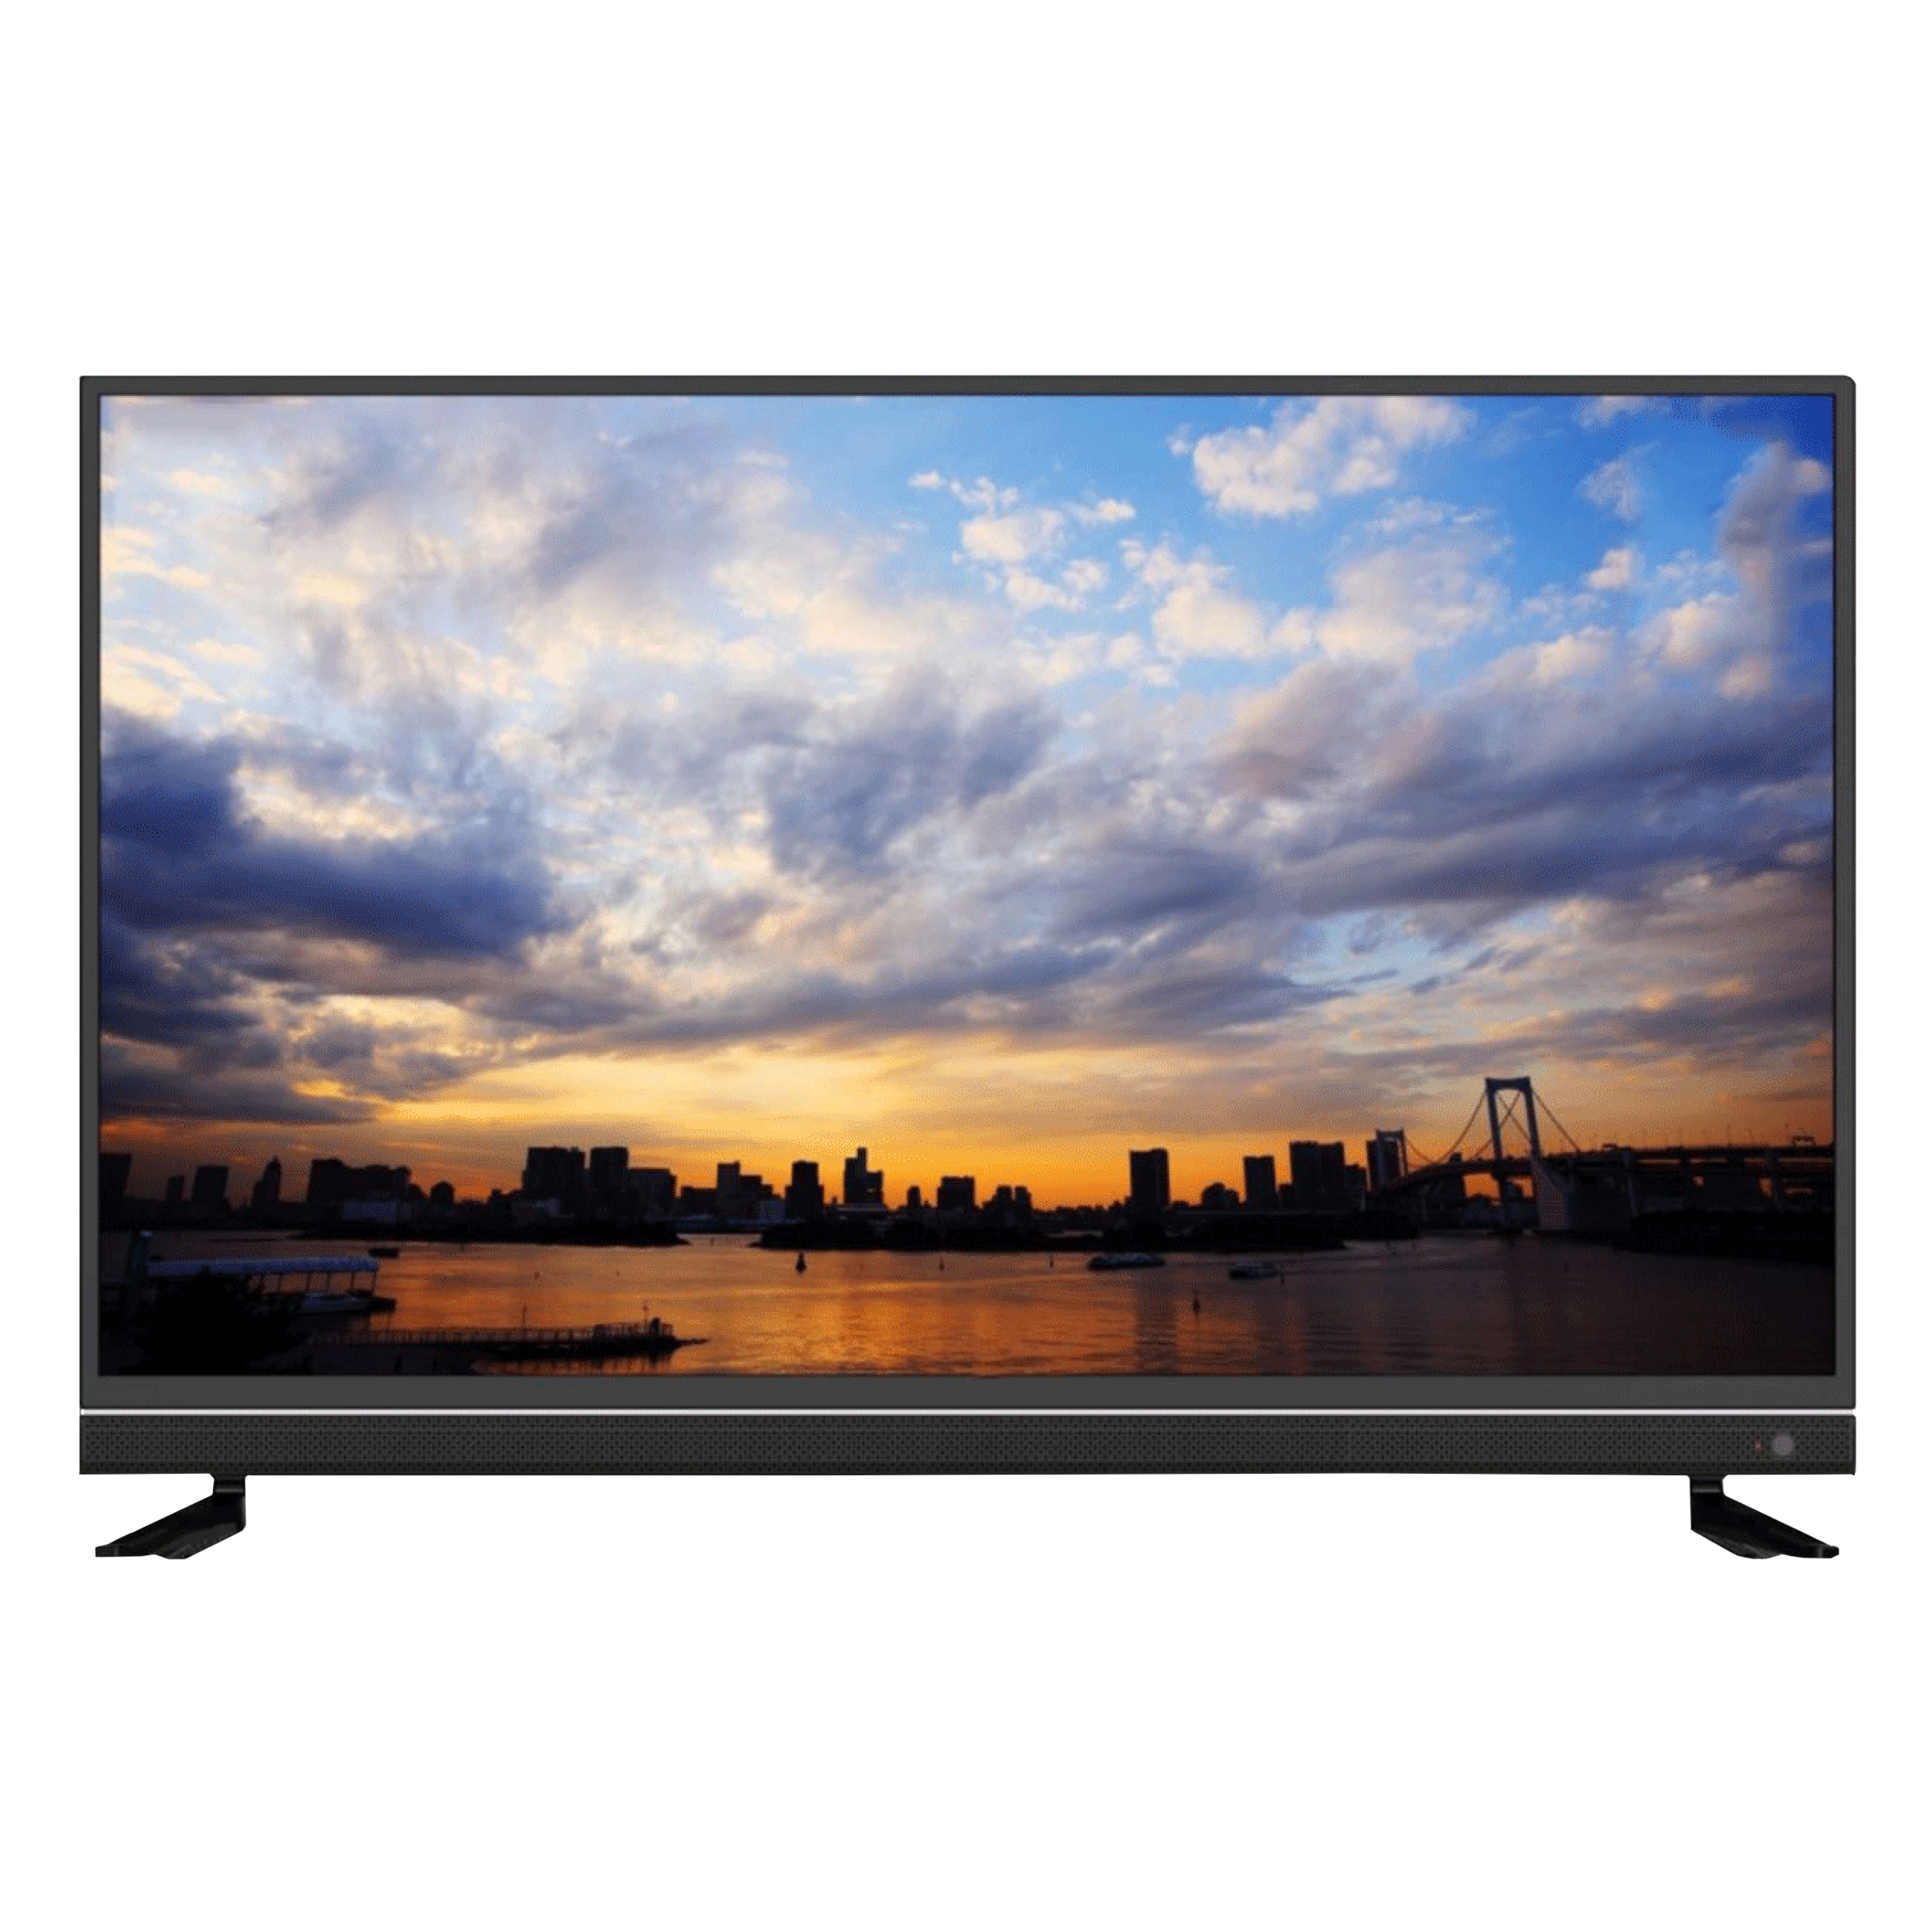 Hitachi 109 cm (43 inch) 4K Ultra HD LED Android TV with A+ Grade Panel (2020 model)_1